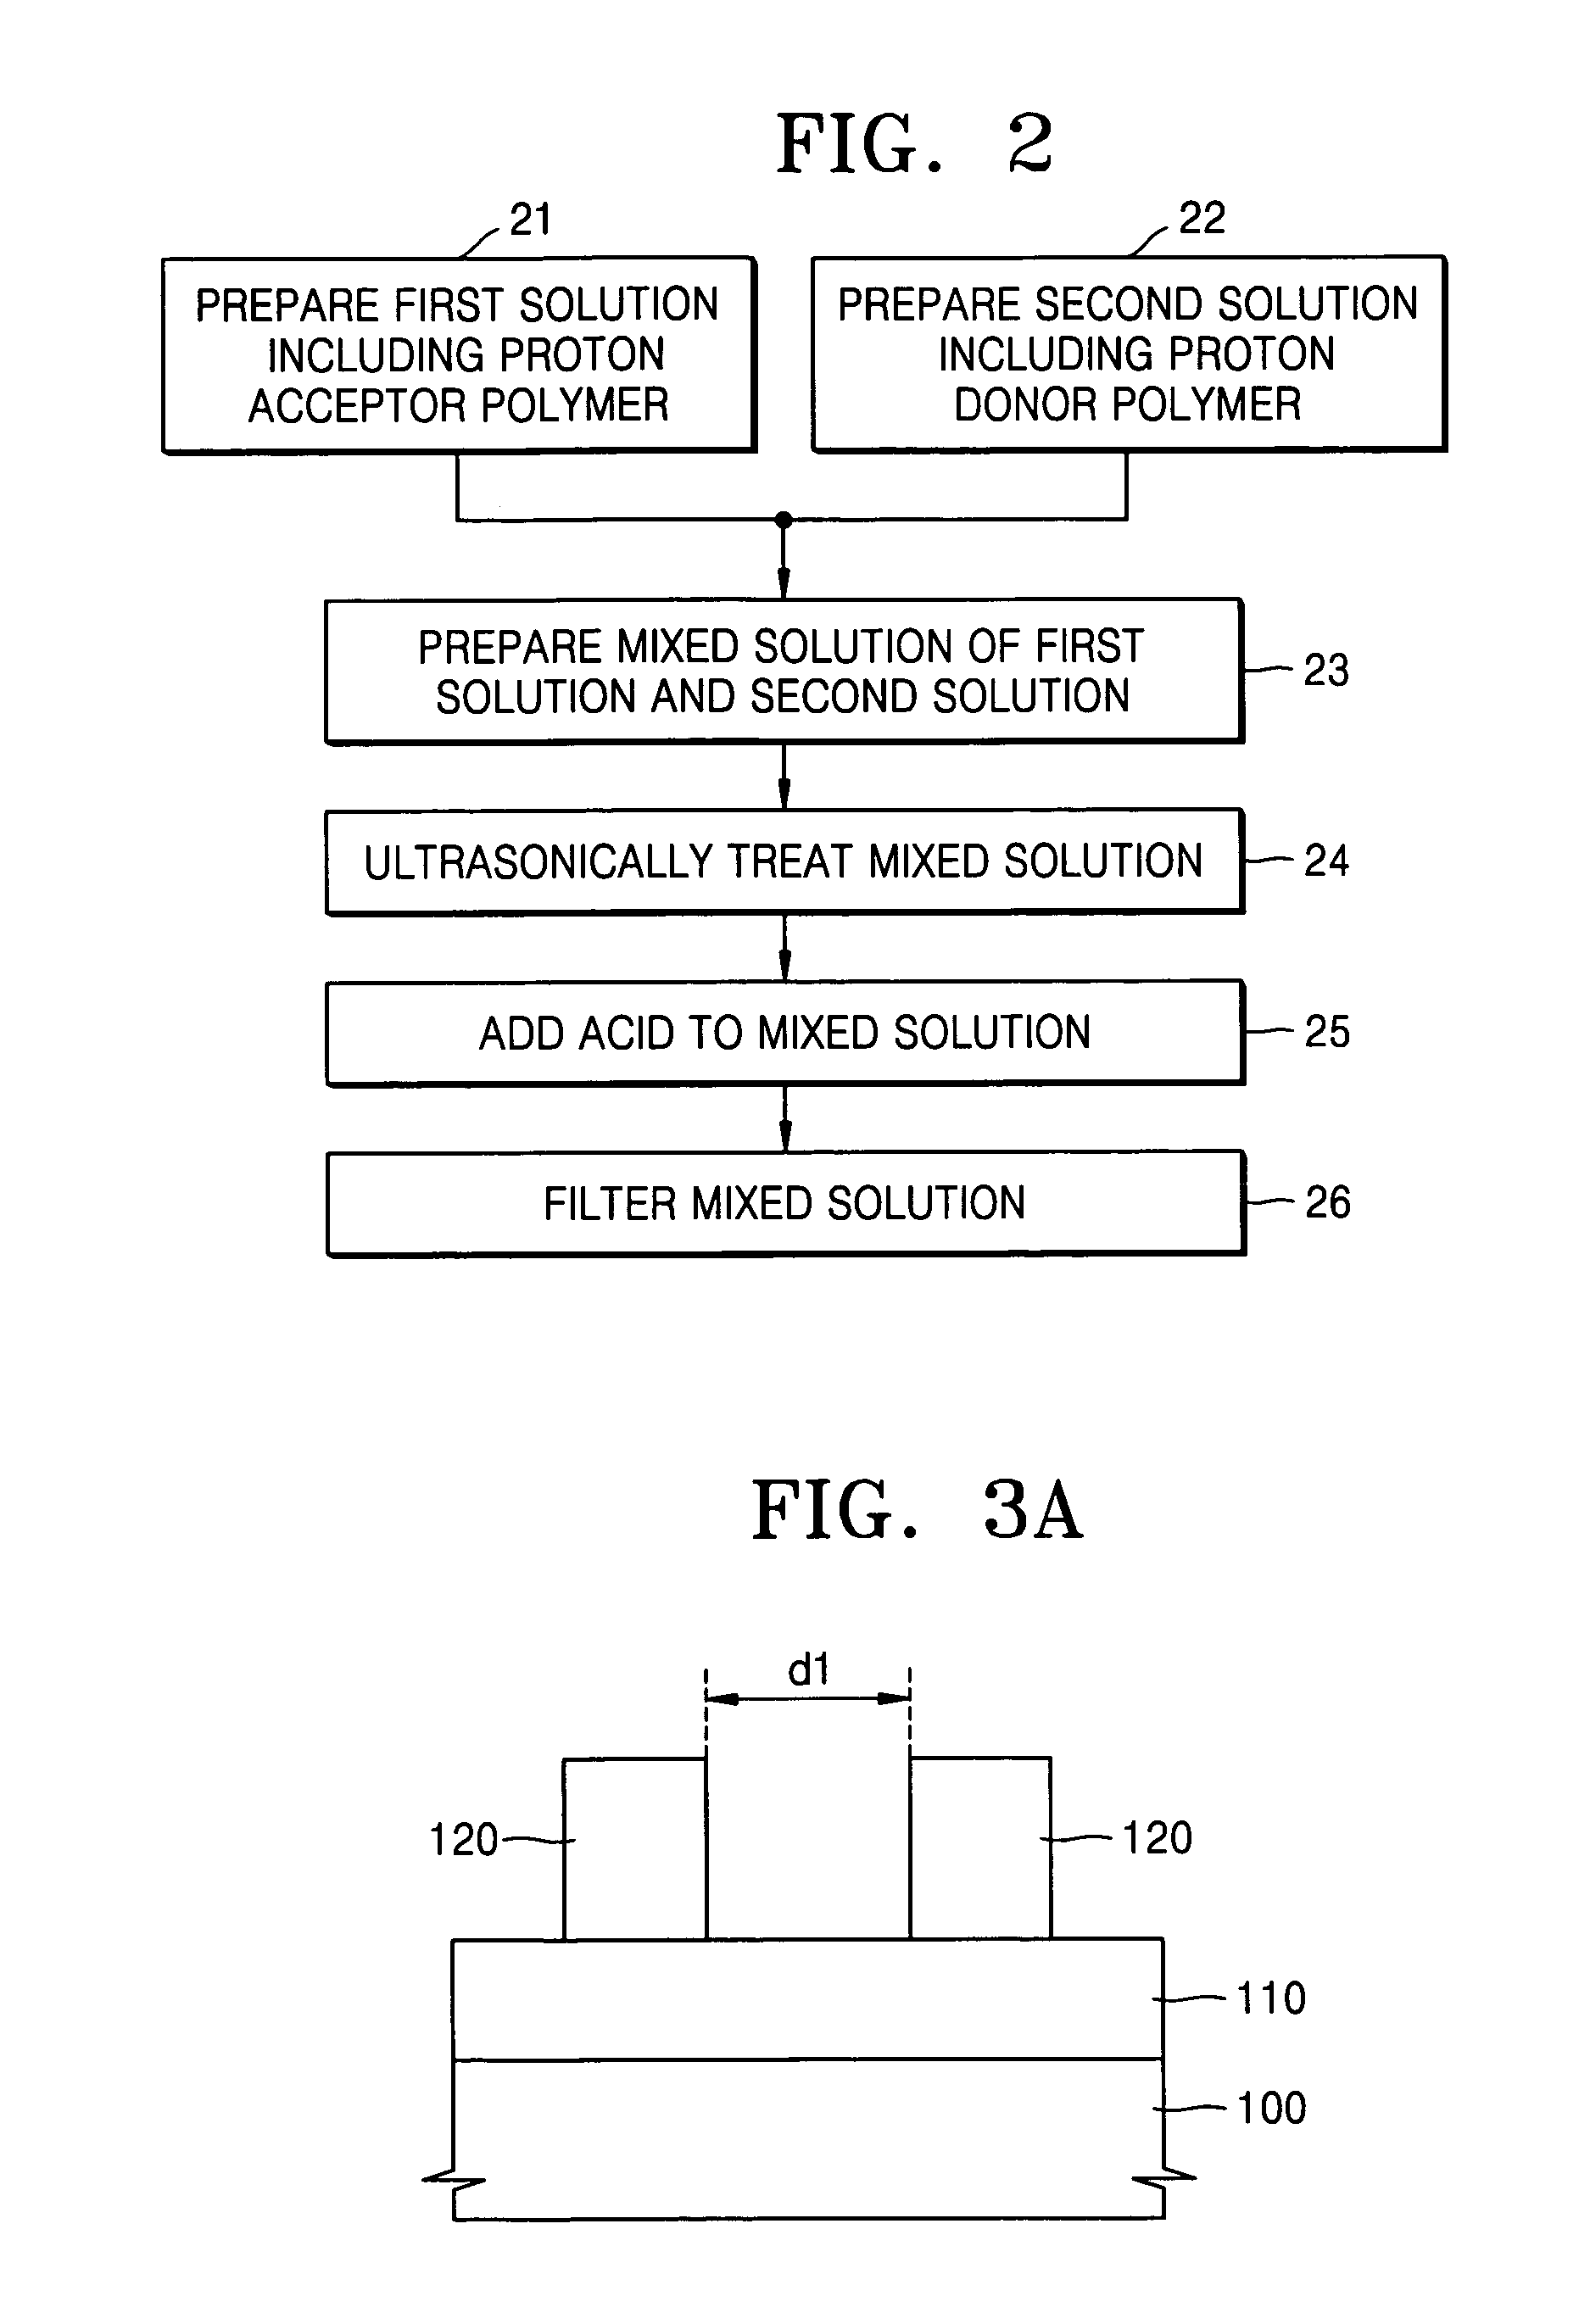 Mask pattern for semiconductor device fabrication, method of forming the same, method for preparing coating composition for fine pattern formation, and method of fabricating semiconductor device